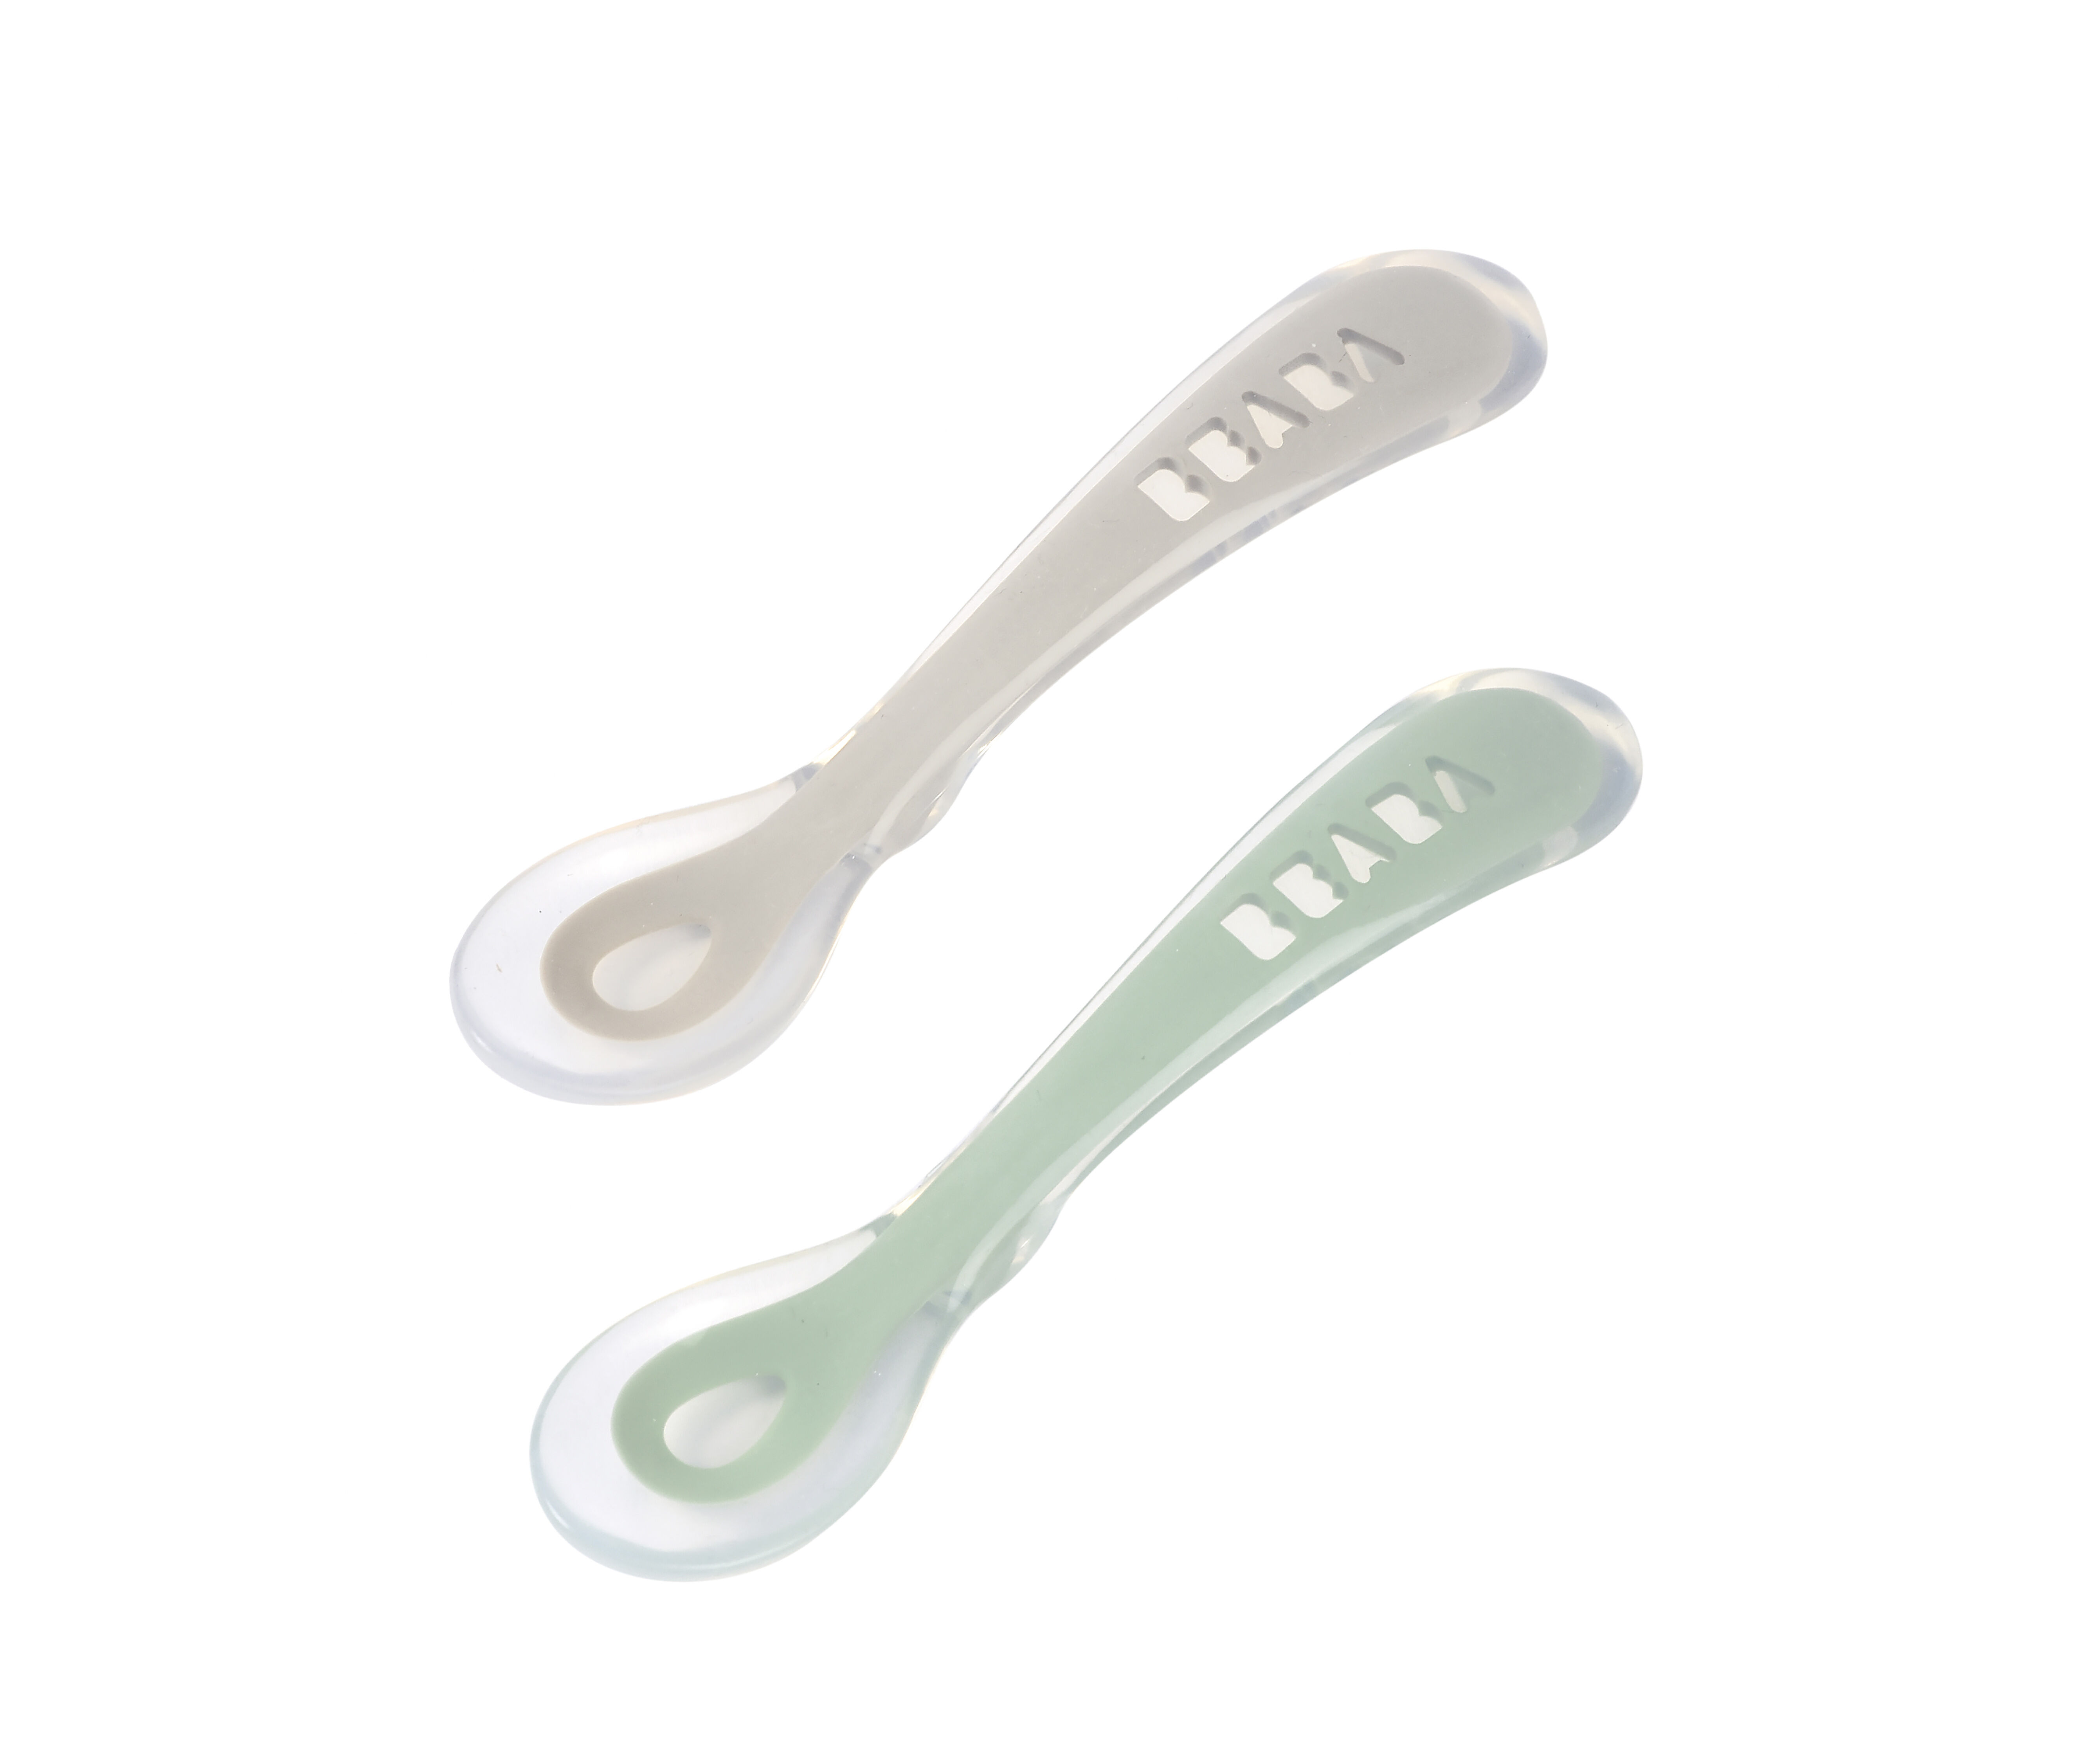 2nd stage 2 silicone spoon set + carry box velvet grey / sag | BEABA